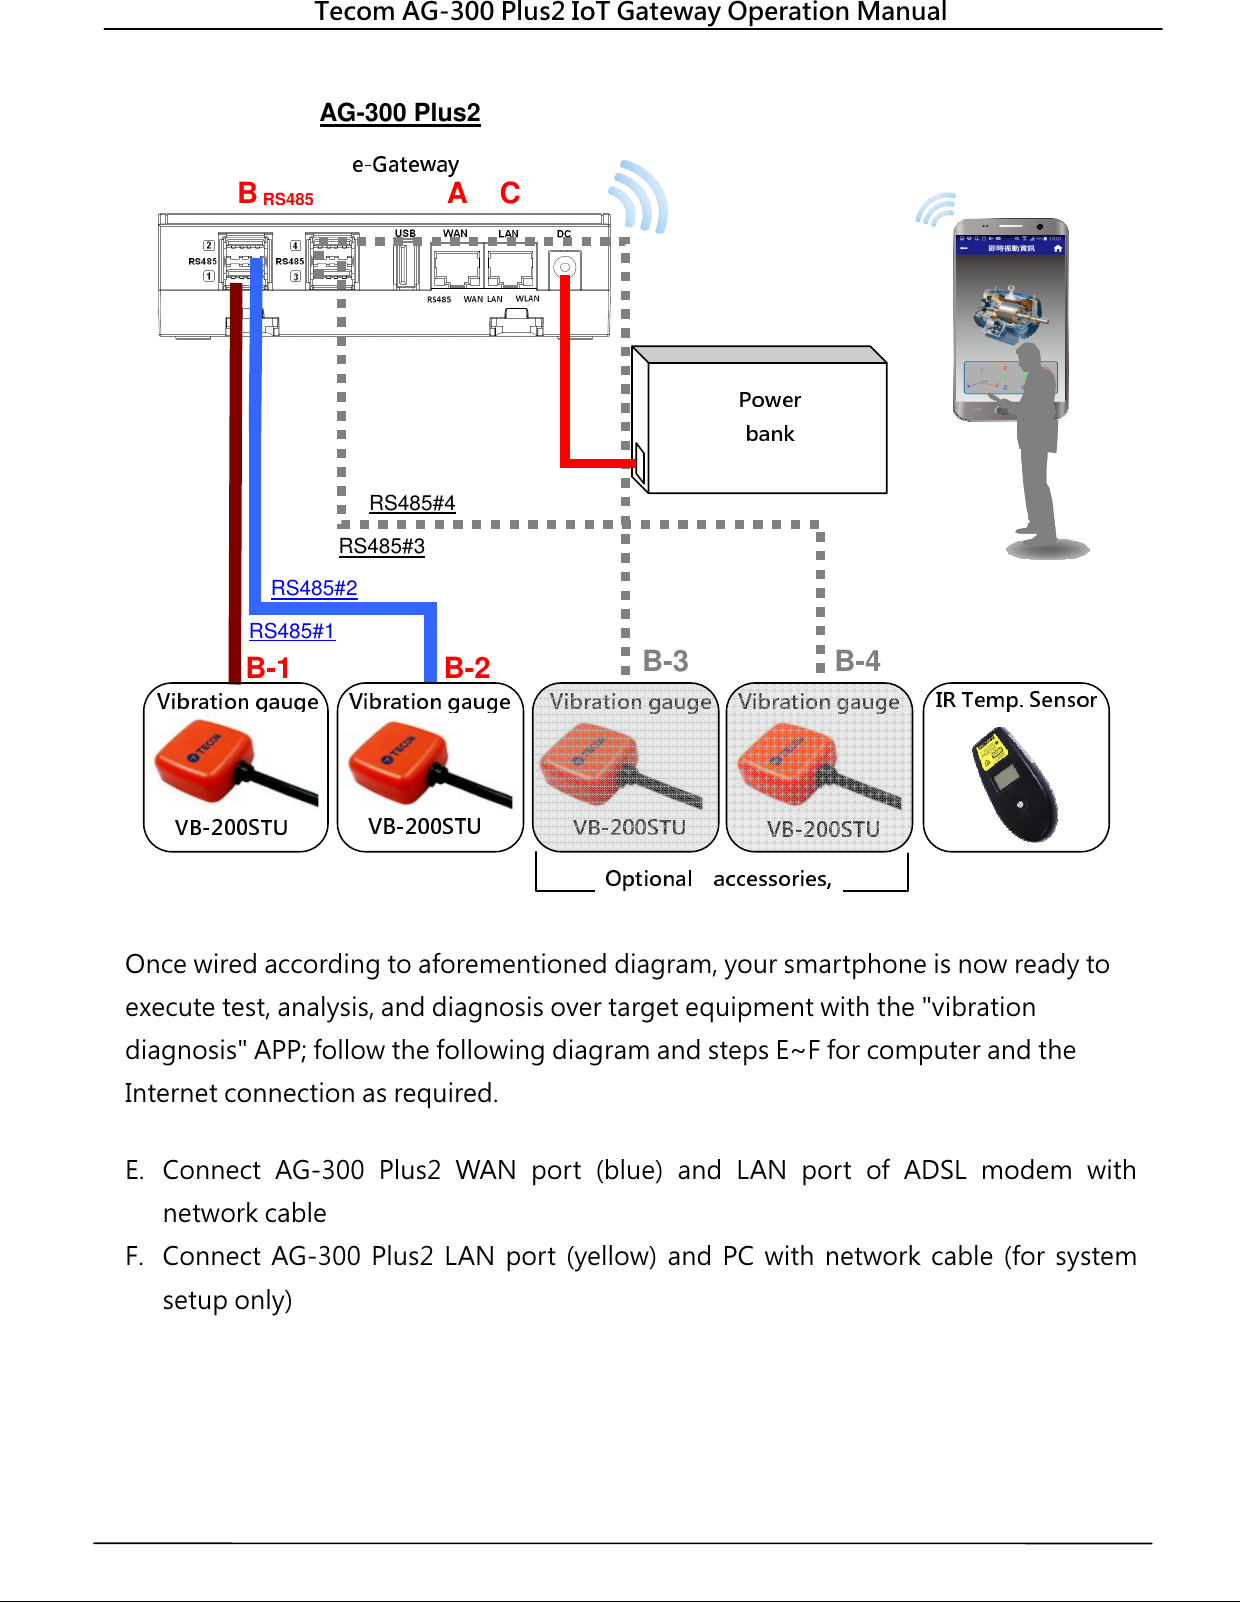  Tecom AG-300 Plus2 IoT Gateway Operation Manual       Once wired according to aforementioned diagram, your smartphone is now ready to execute test, analysis, and diagnosis over target equipment with the &quot;vibration diagnosis&quot; APP; follow the following diagram and steps E~F for computer and the Internet connection as required.  E. Connect  AG-300  Plus2  WAN  port  (blue)  and  LAN  port  of  ADSL  modem  with network cable F. Connect  AG-300  Plus2  LAN  port  (yellow)  and  PC  with  network  cable  (for  system setup only)    RS485#1 RS485#2 A B C RS485 AG-300 Plus2  RS485#3 RS485#4 B-1 B-2 B-3 B-4 